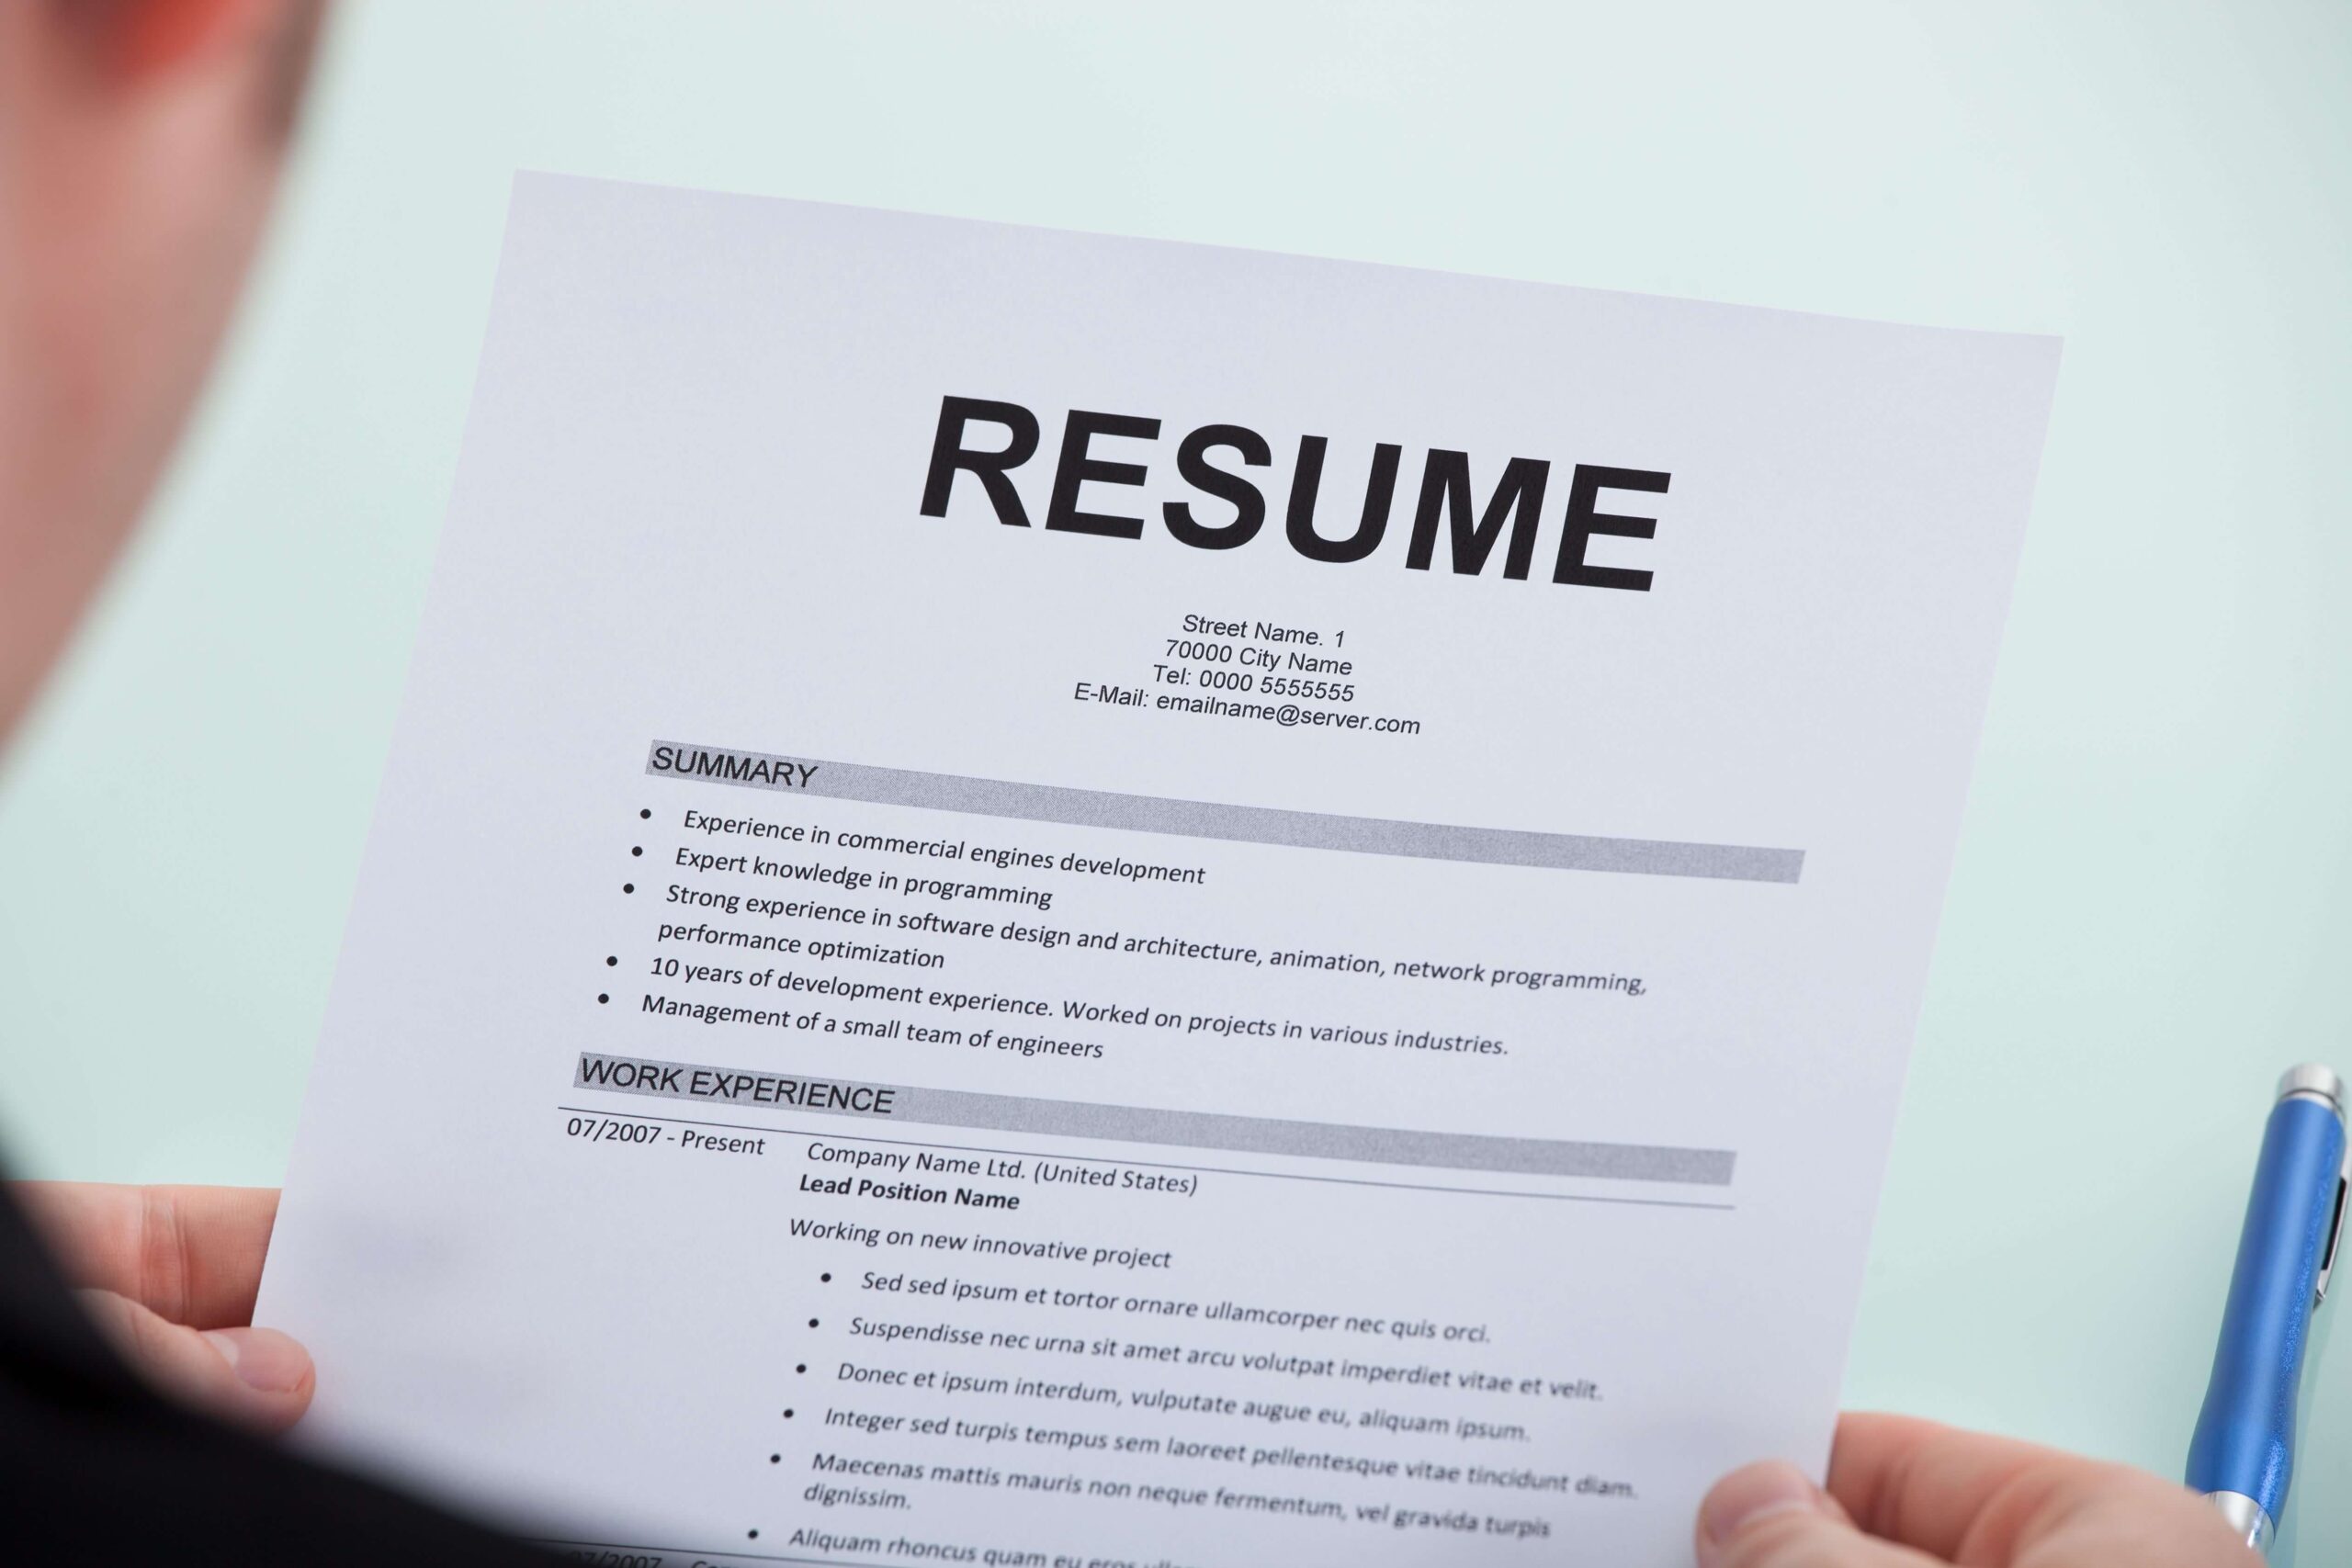 How Many Previous Jobs are on Resume